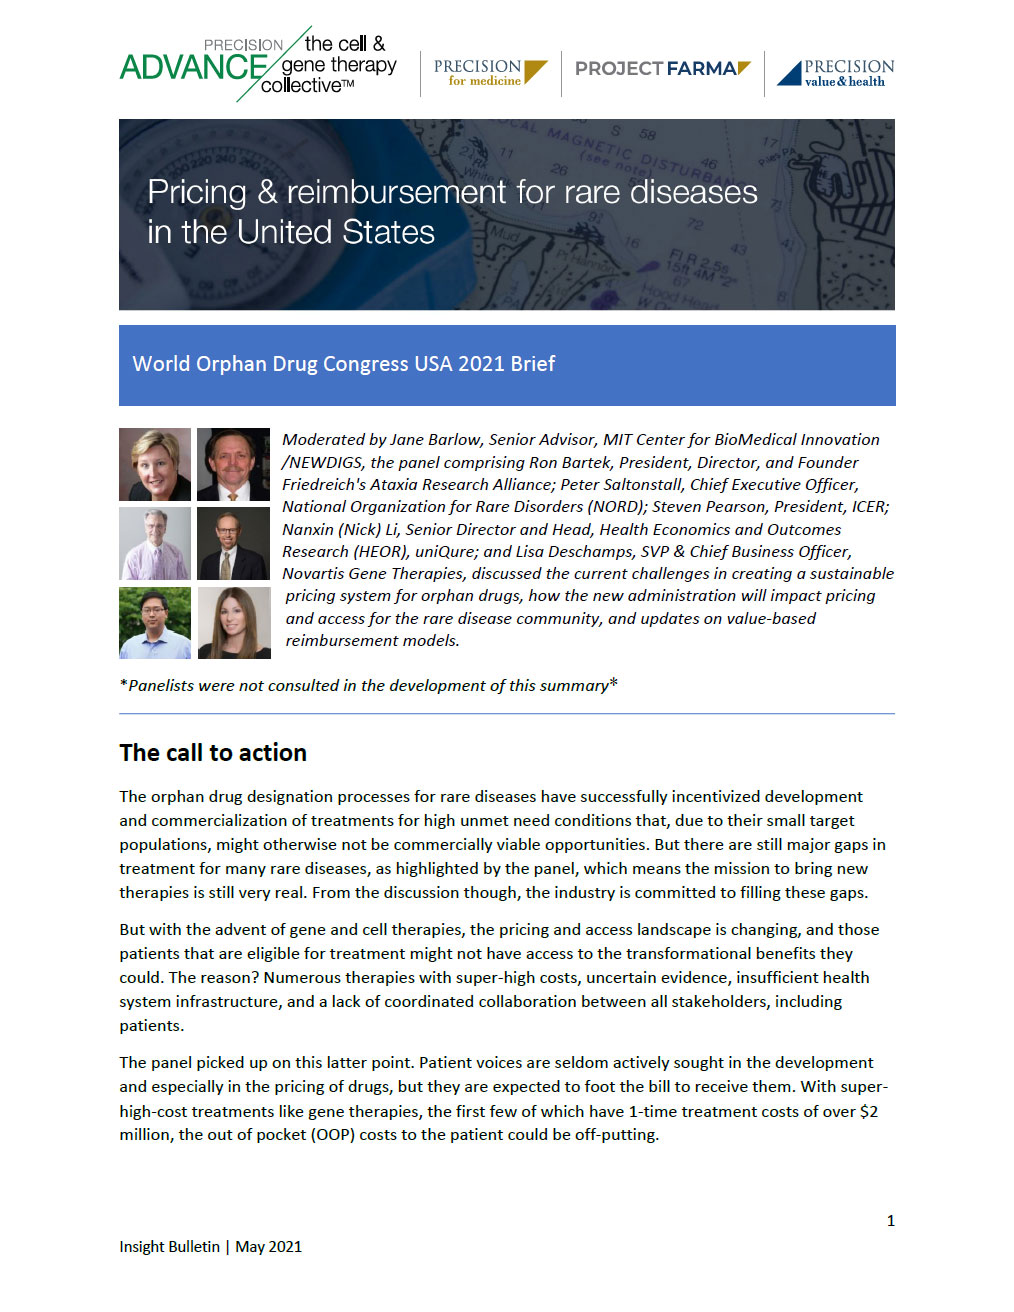 WODC Panel Summary: Pricing and Reimbursement for Rare Diseases in the United States brief thumbnail